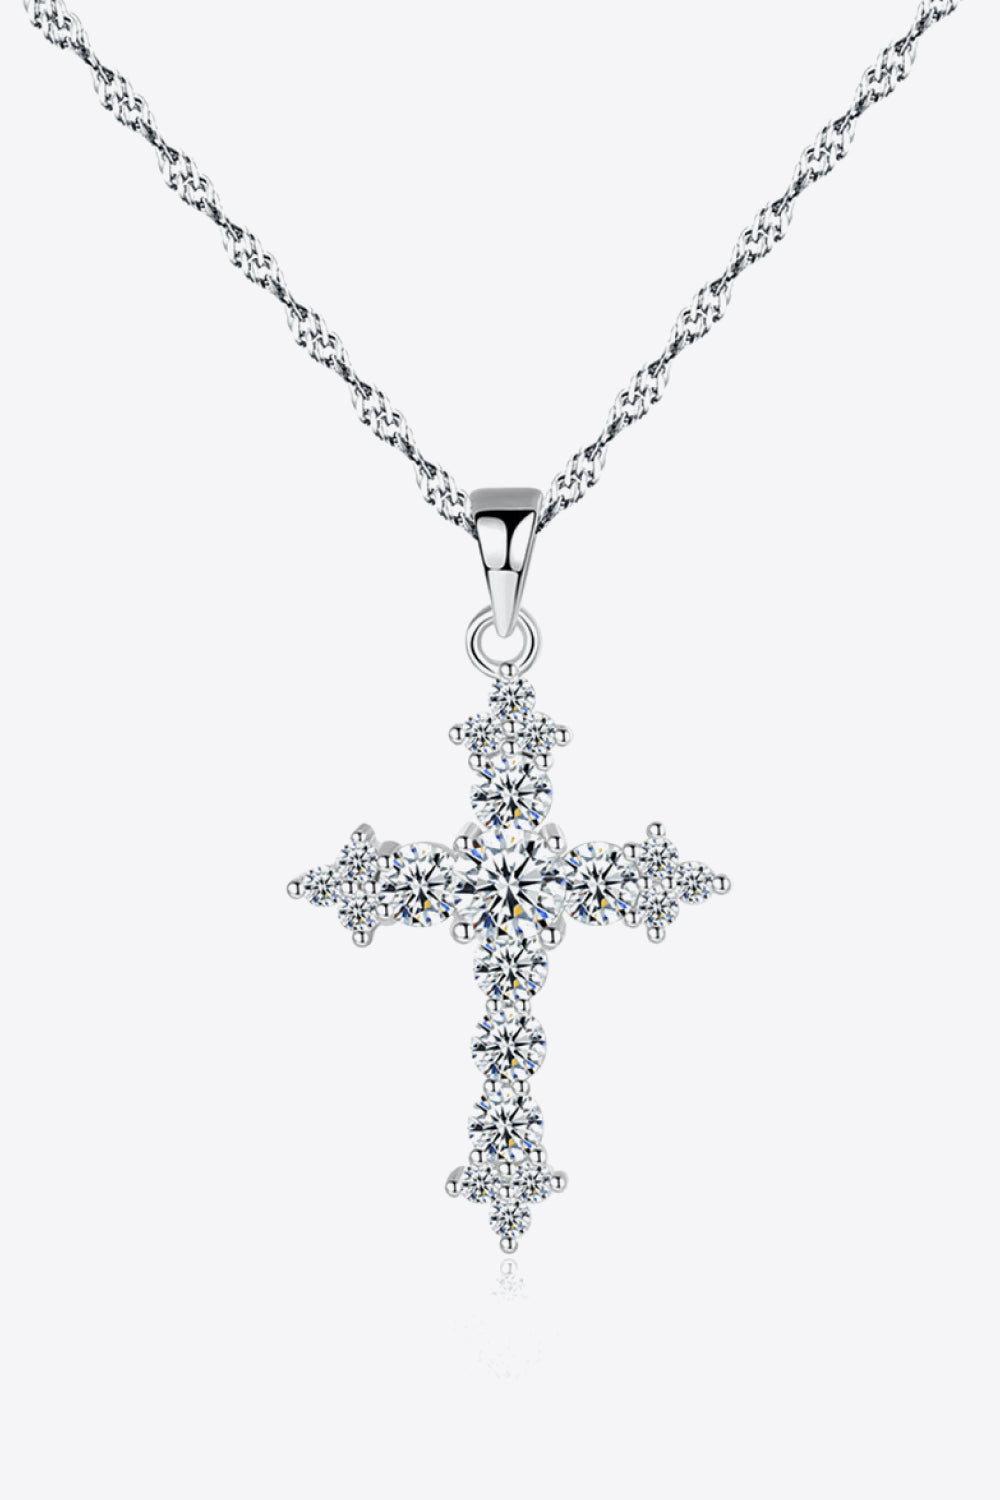 Zircon Cross Pendant 925 Sterling Silver Necklace free shipping -Oh Em Gee Boutique